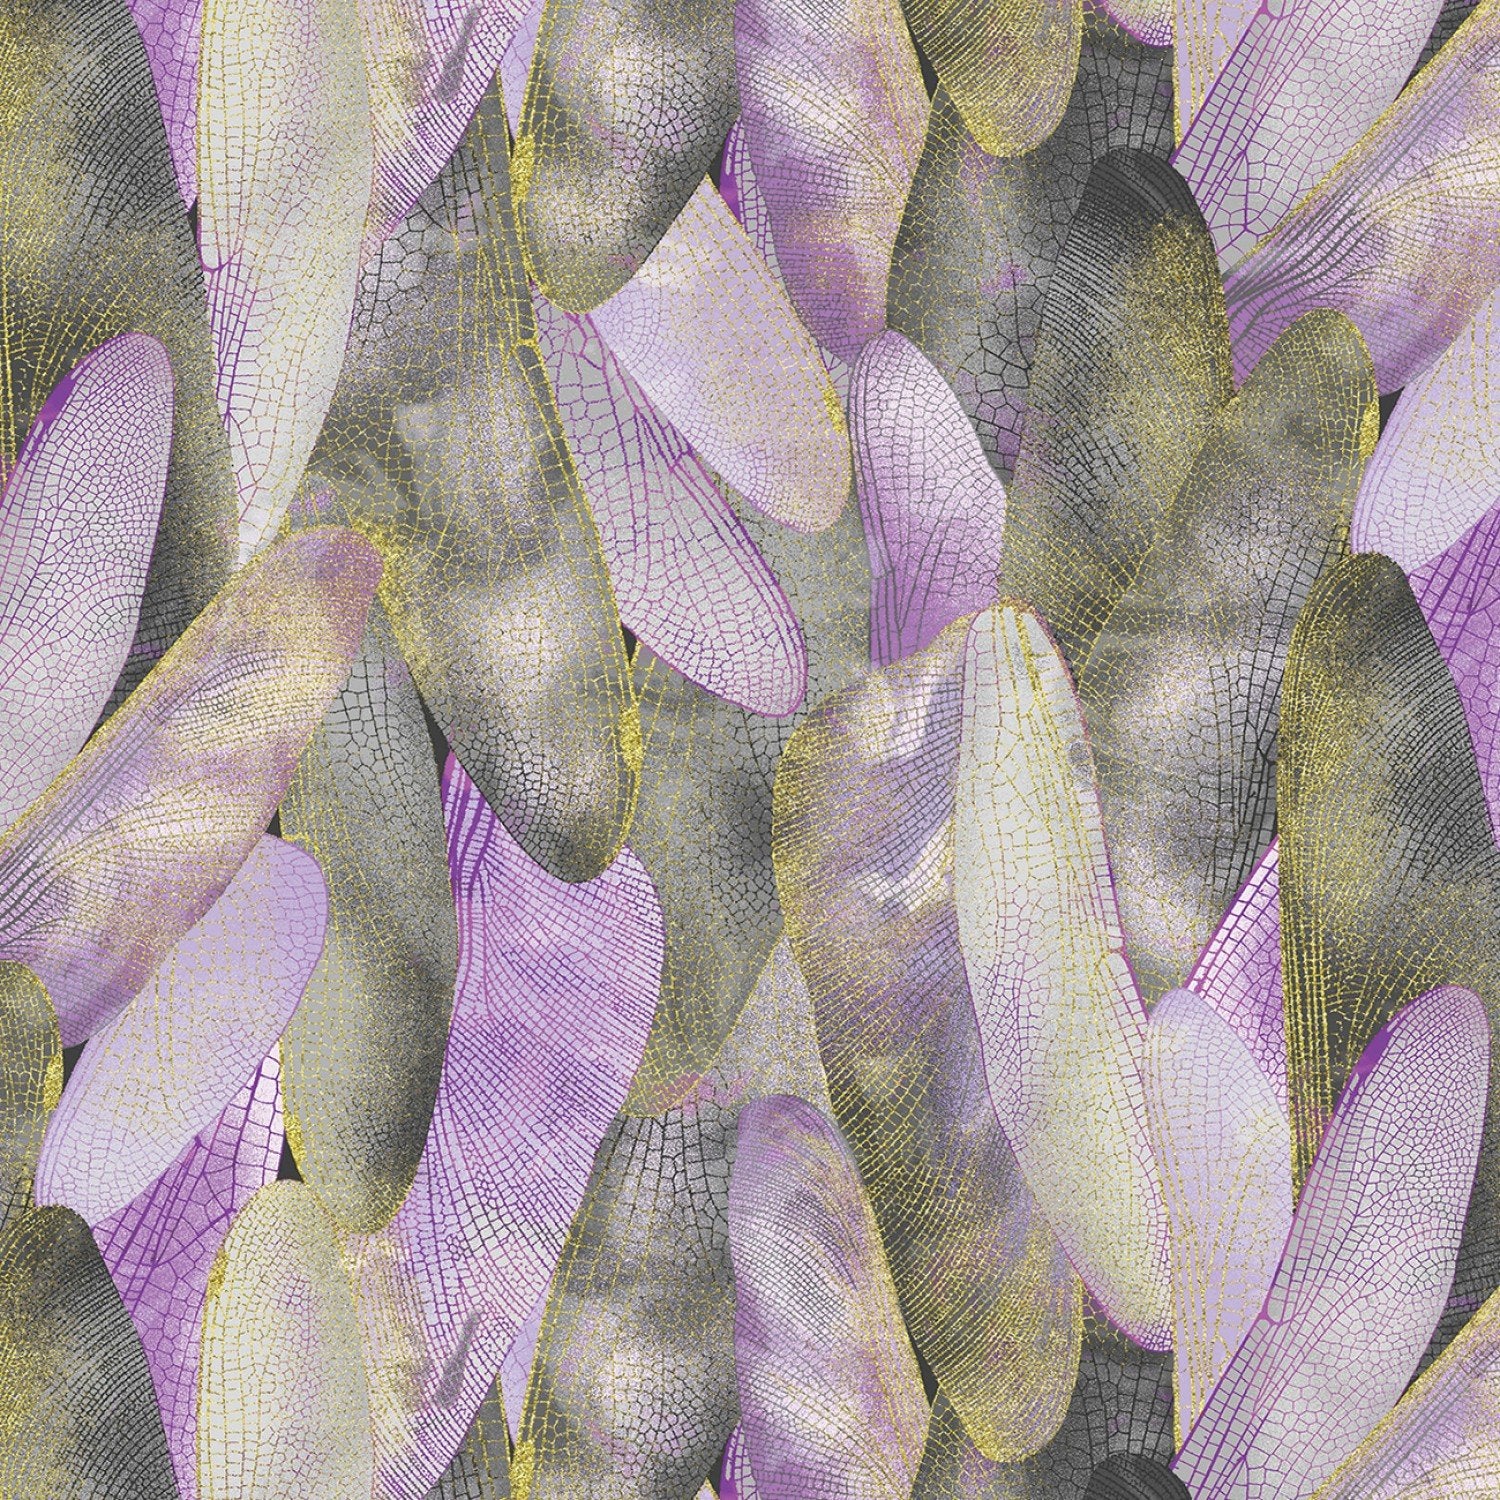 DRAGONFLY DANCE Gilded Wings lavender/gray